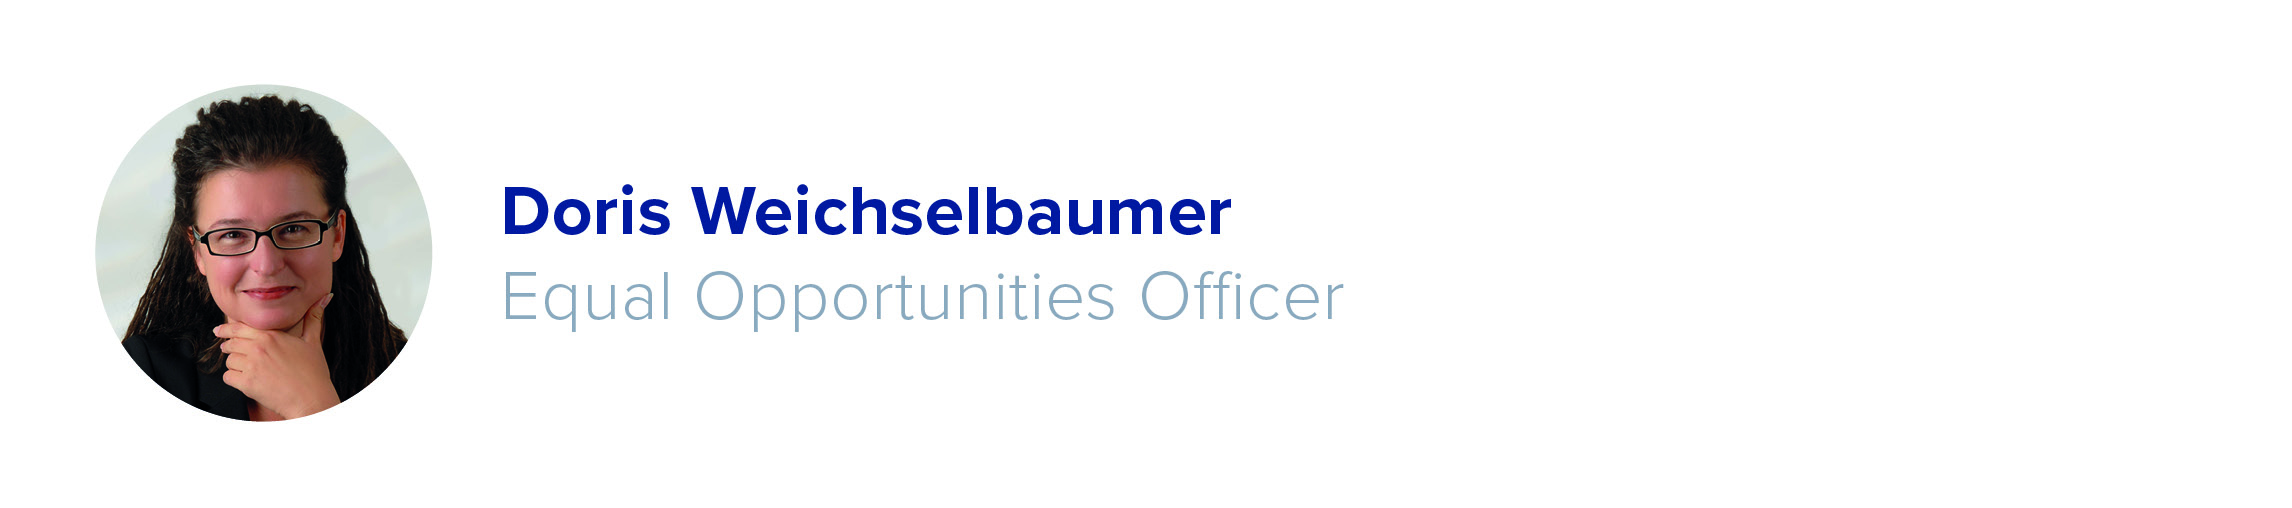 Equal Opportunities Officer